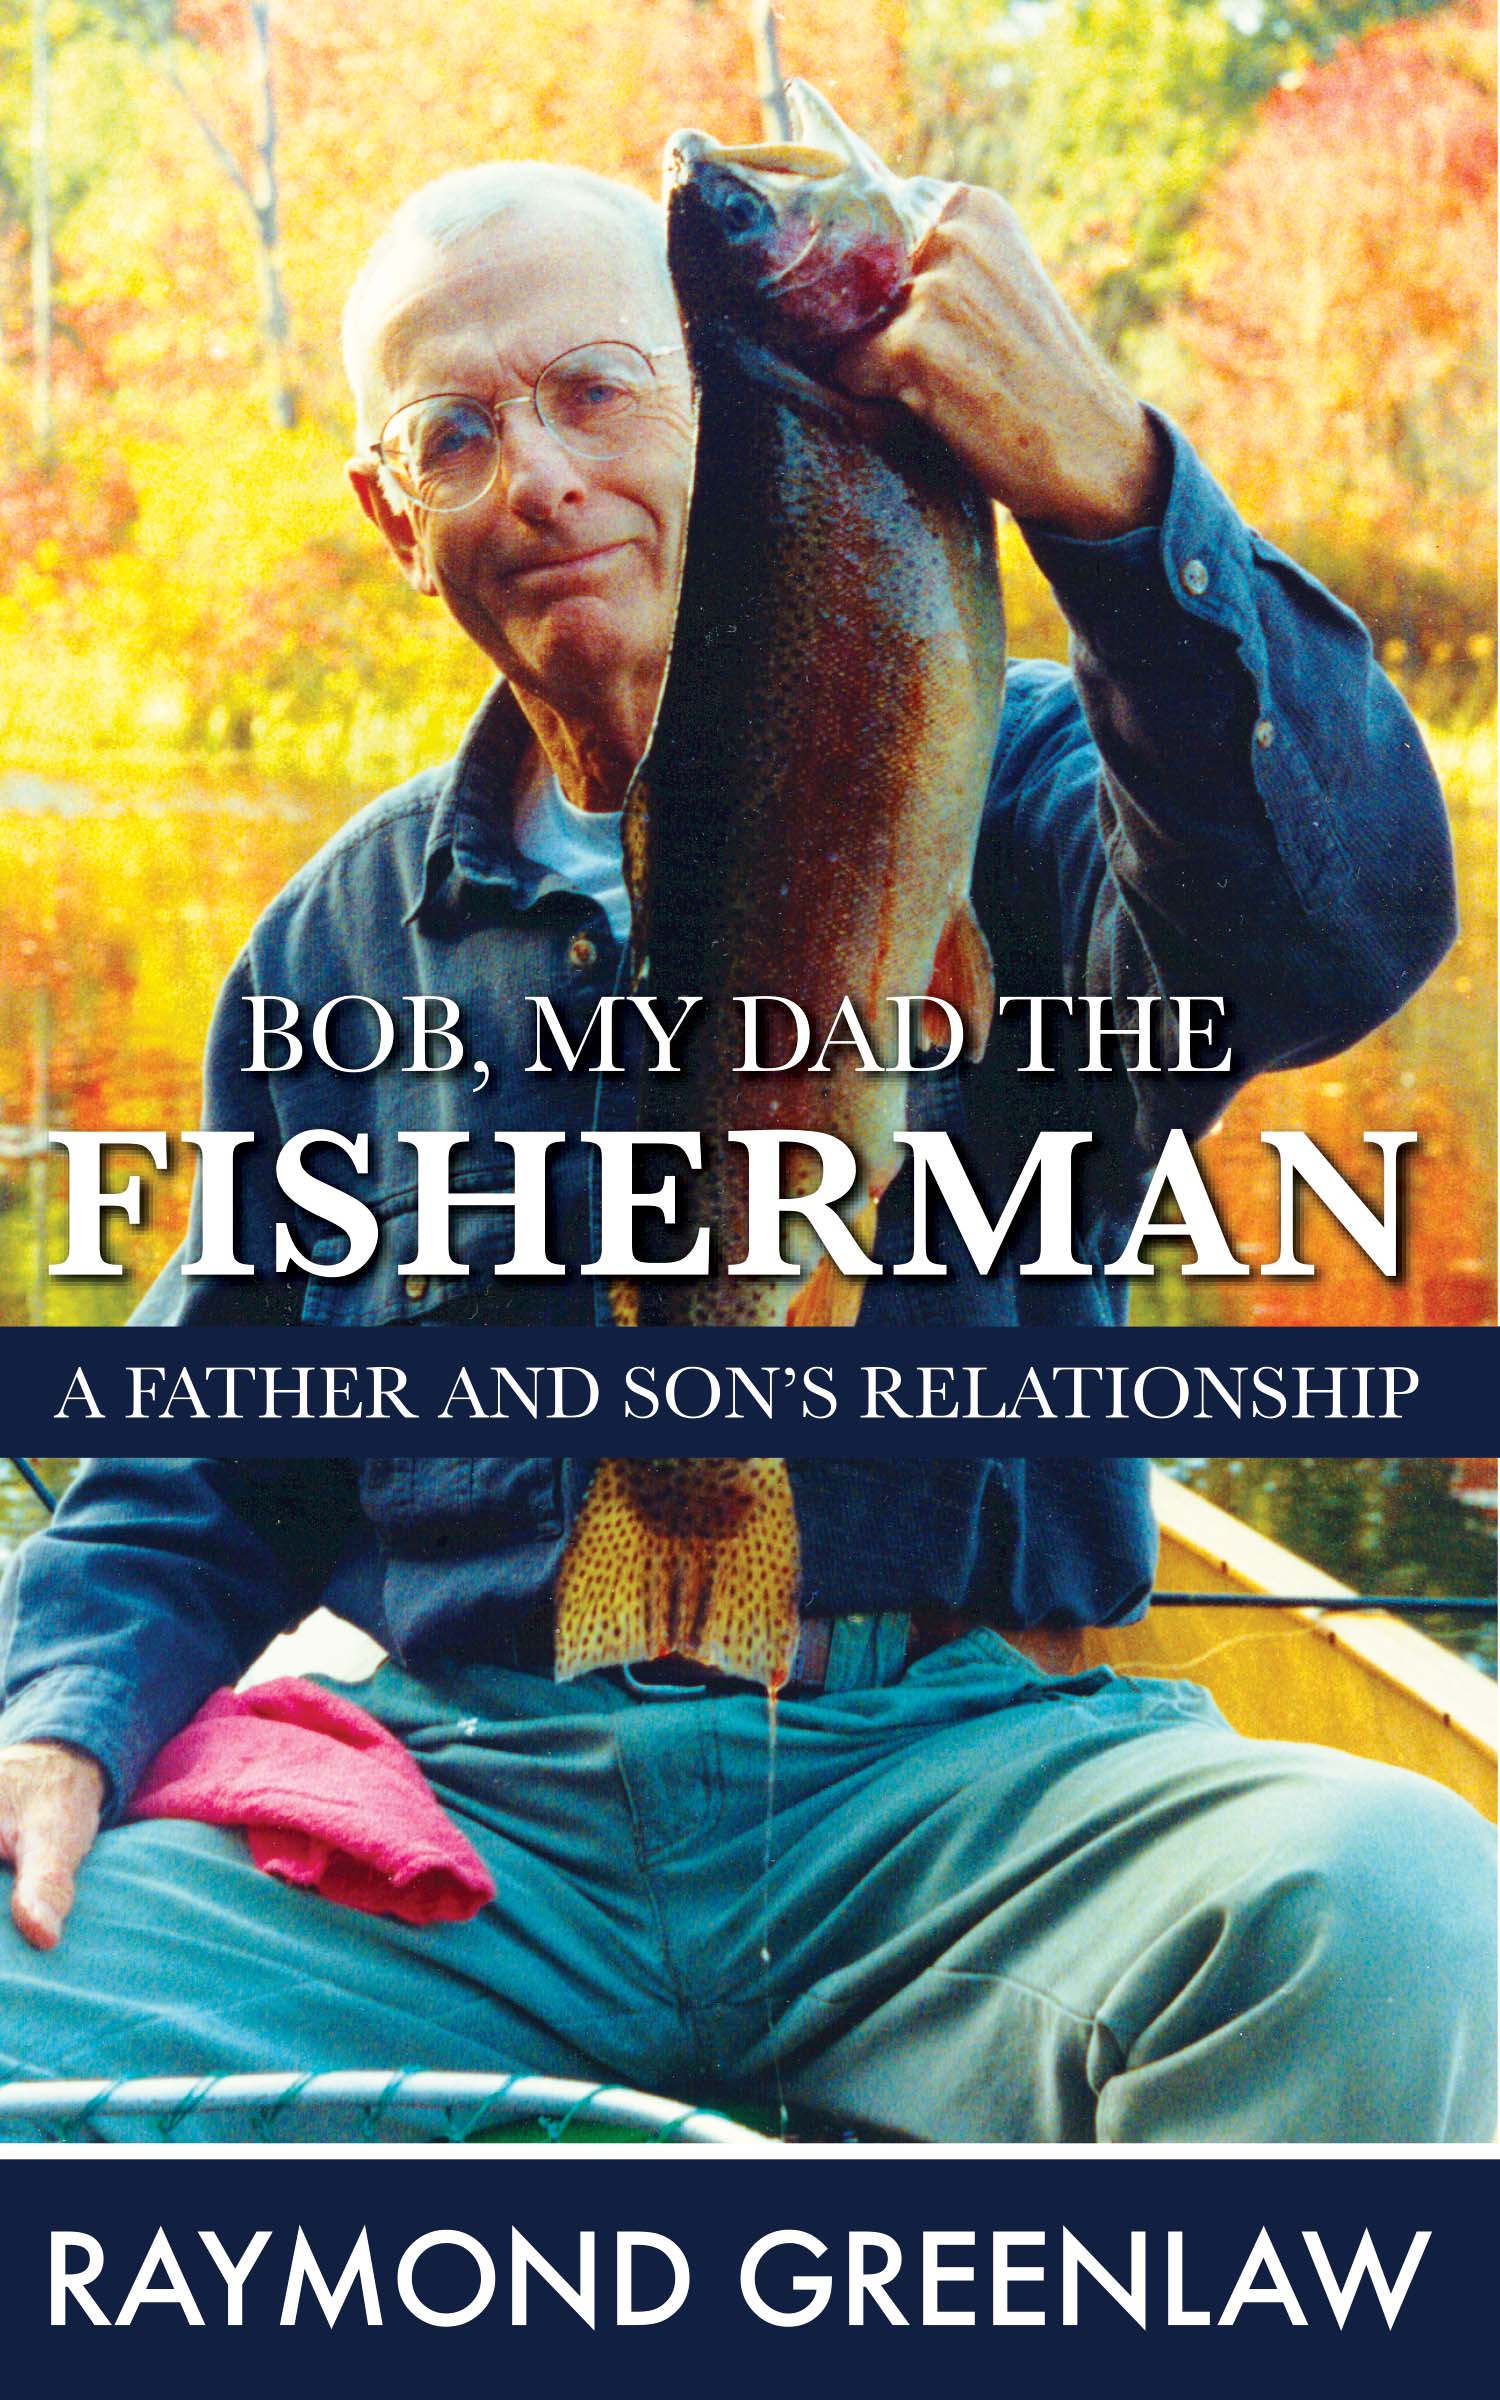 Bob, My Dad the Fisherman: A Father and Son's Relationship: Ebook Cover